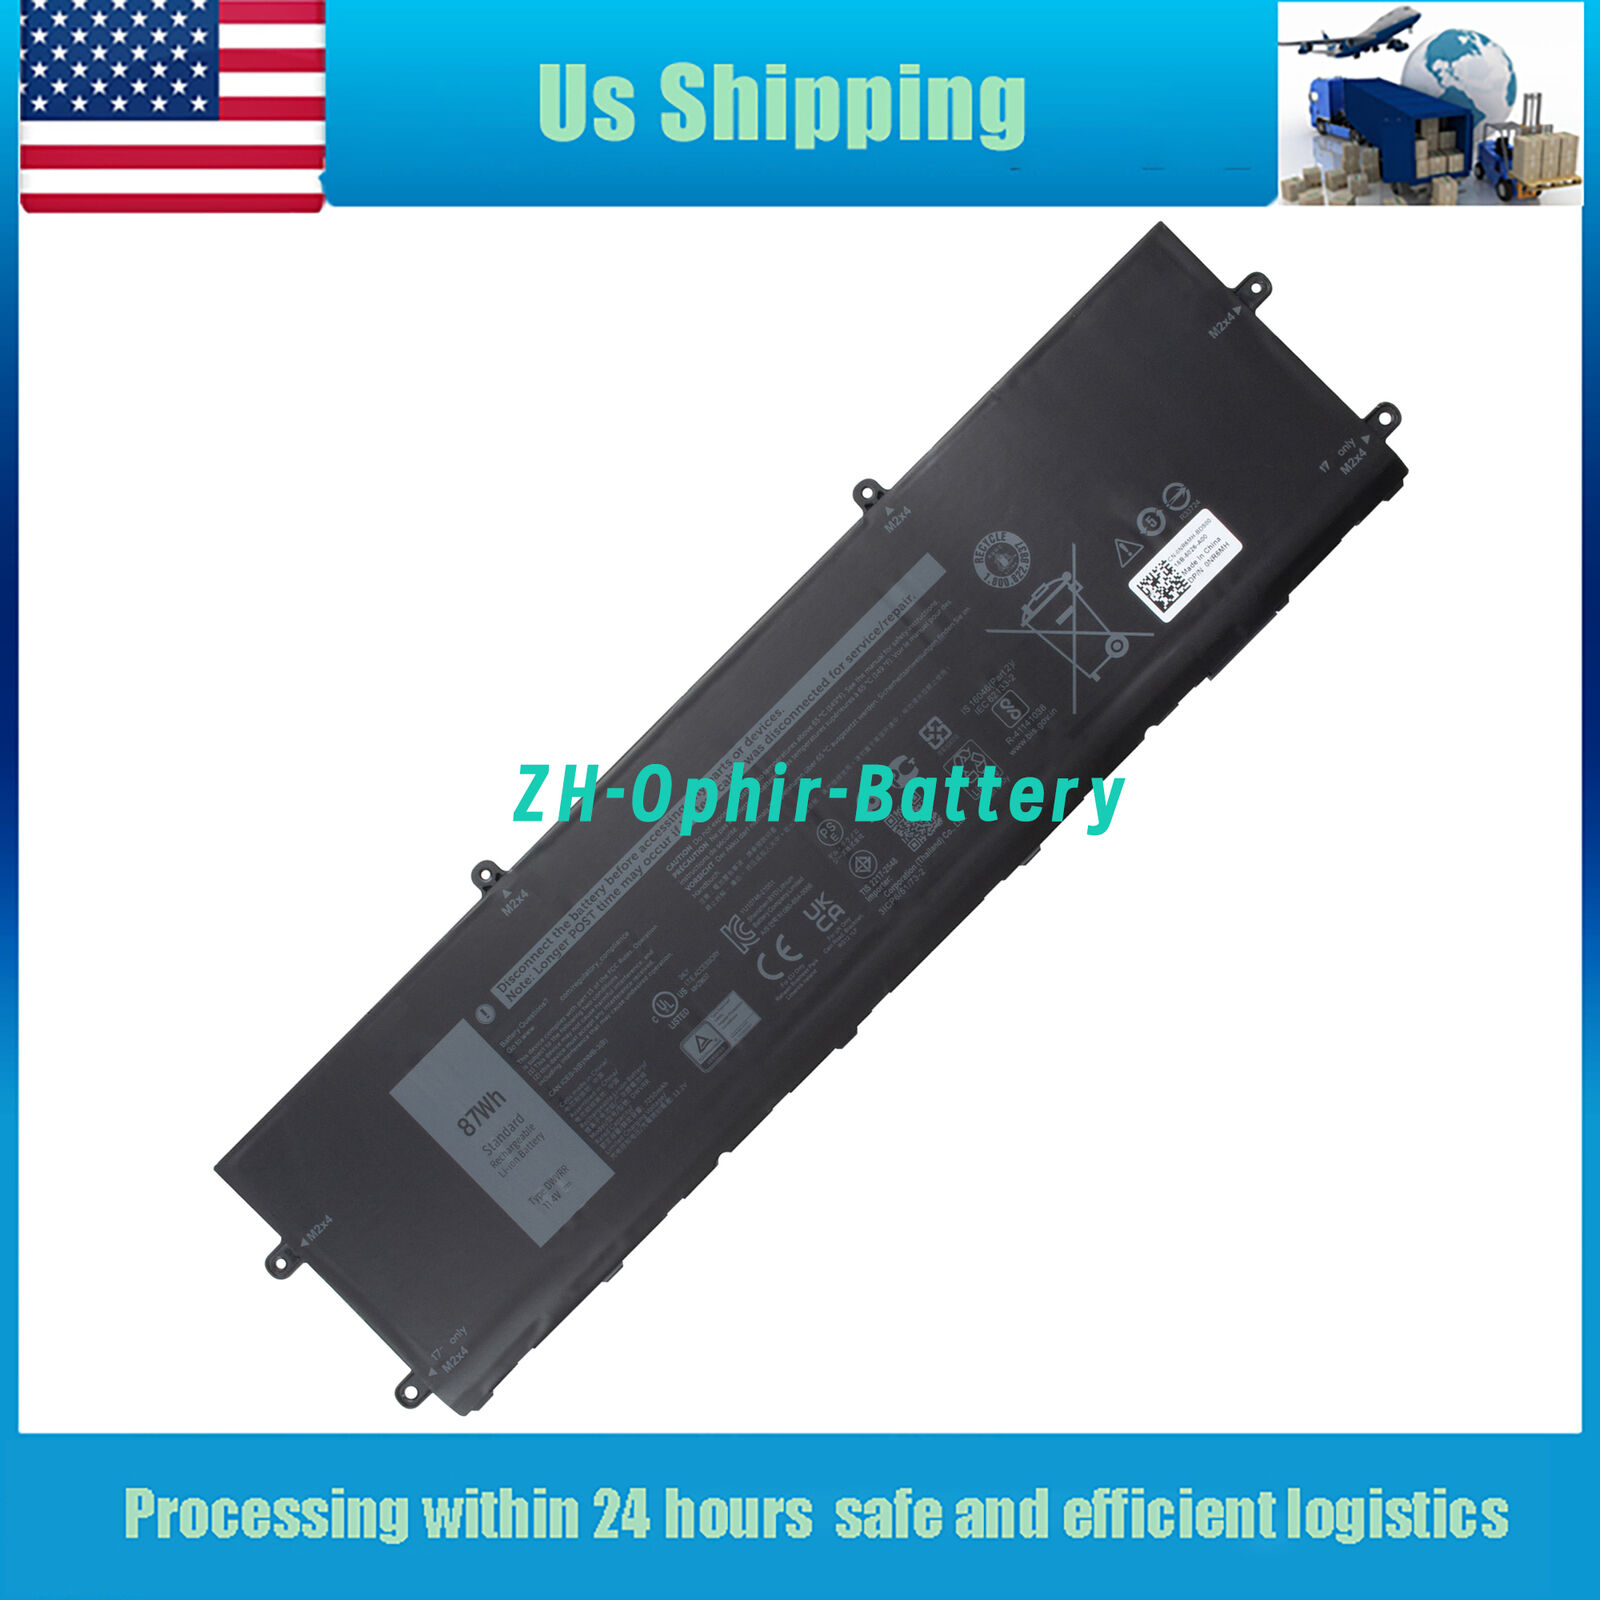 New DWVRR 0817GN 0NR6MH Battery Fits for Dell Alienware X15 R1 R2 X17 R1 R2 87Wh